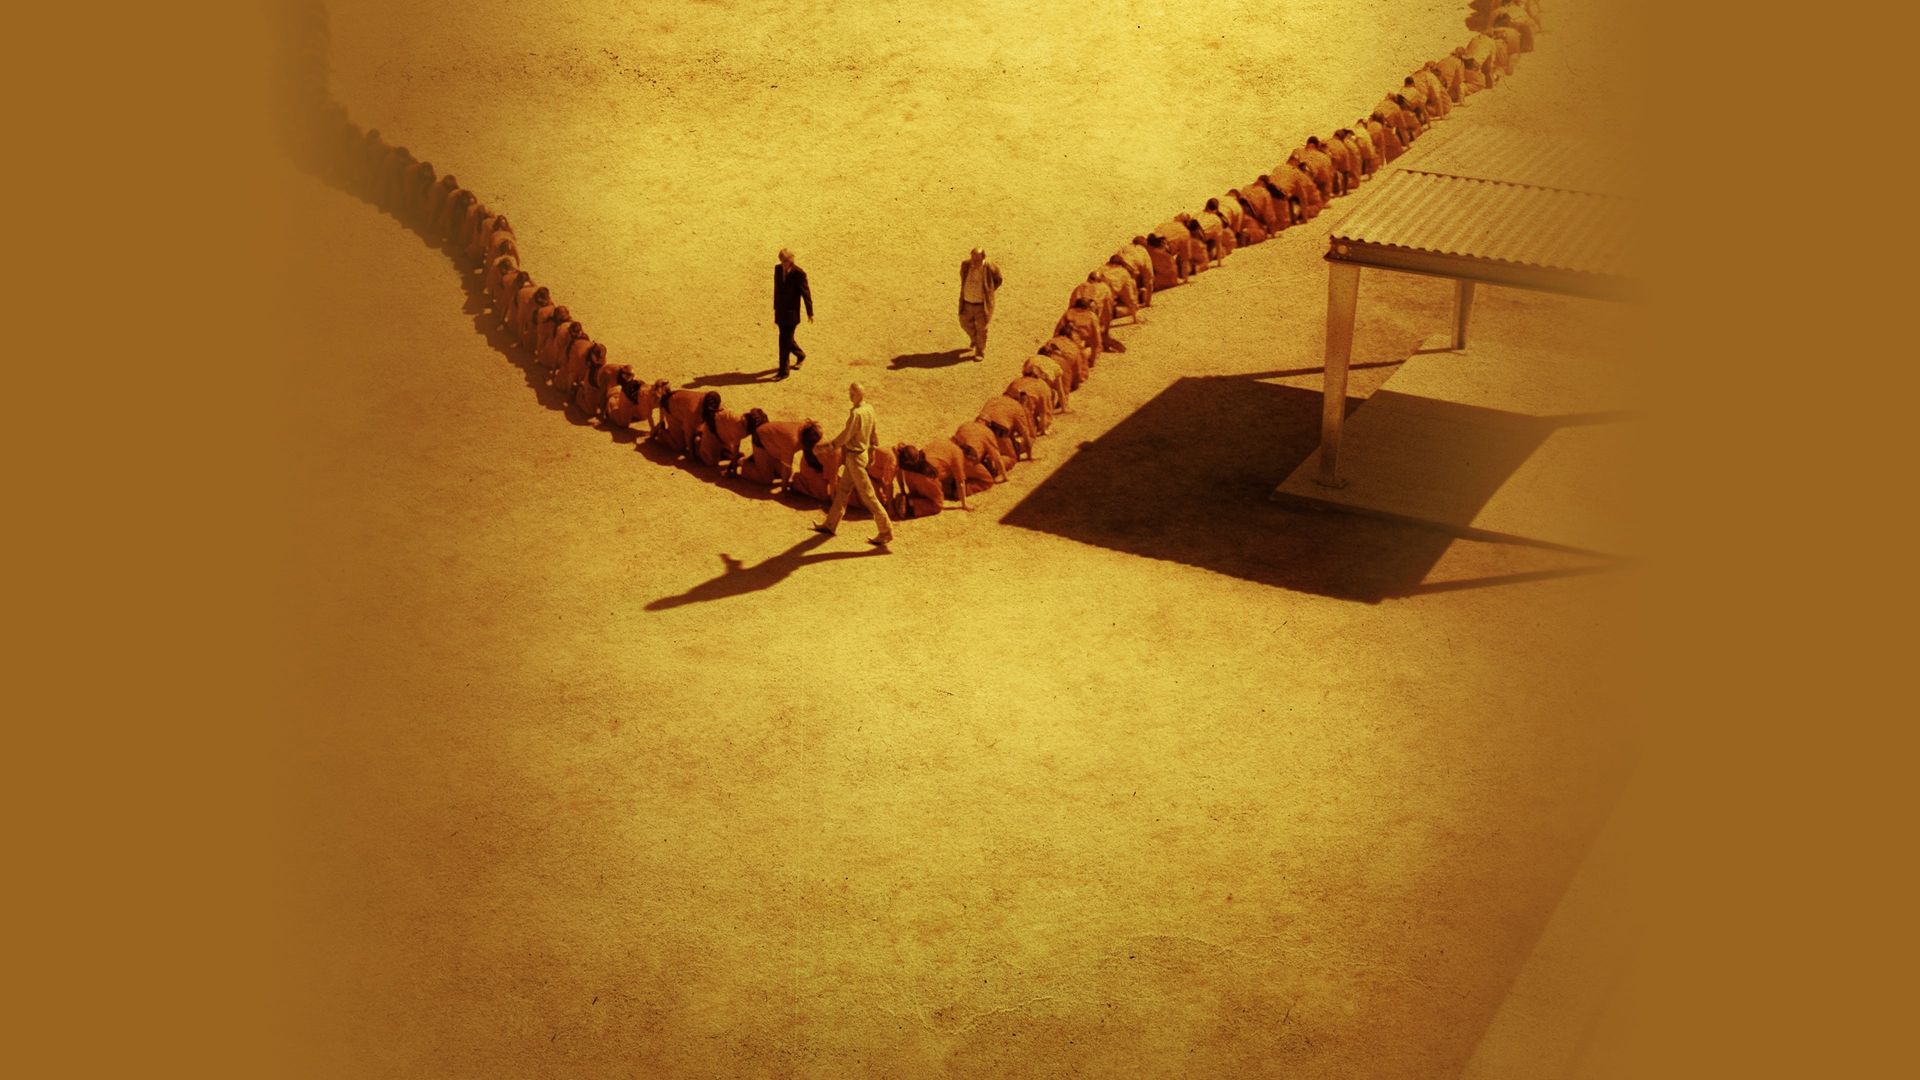 The Human Centipede III (Final Sequence) Backdrop